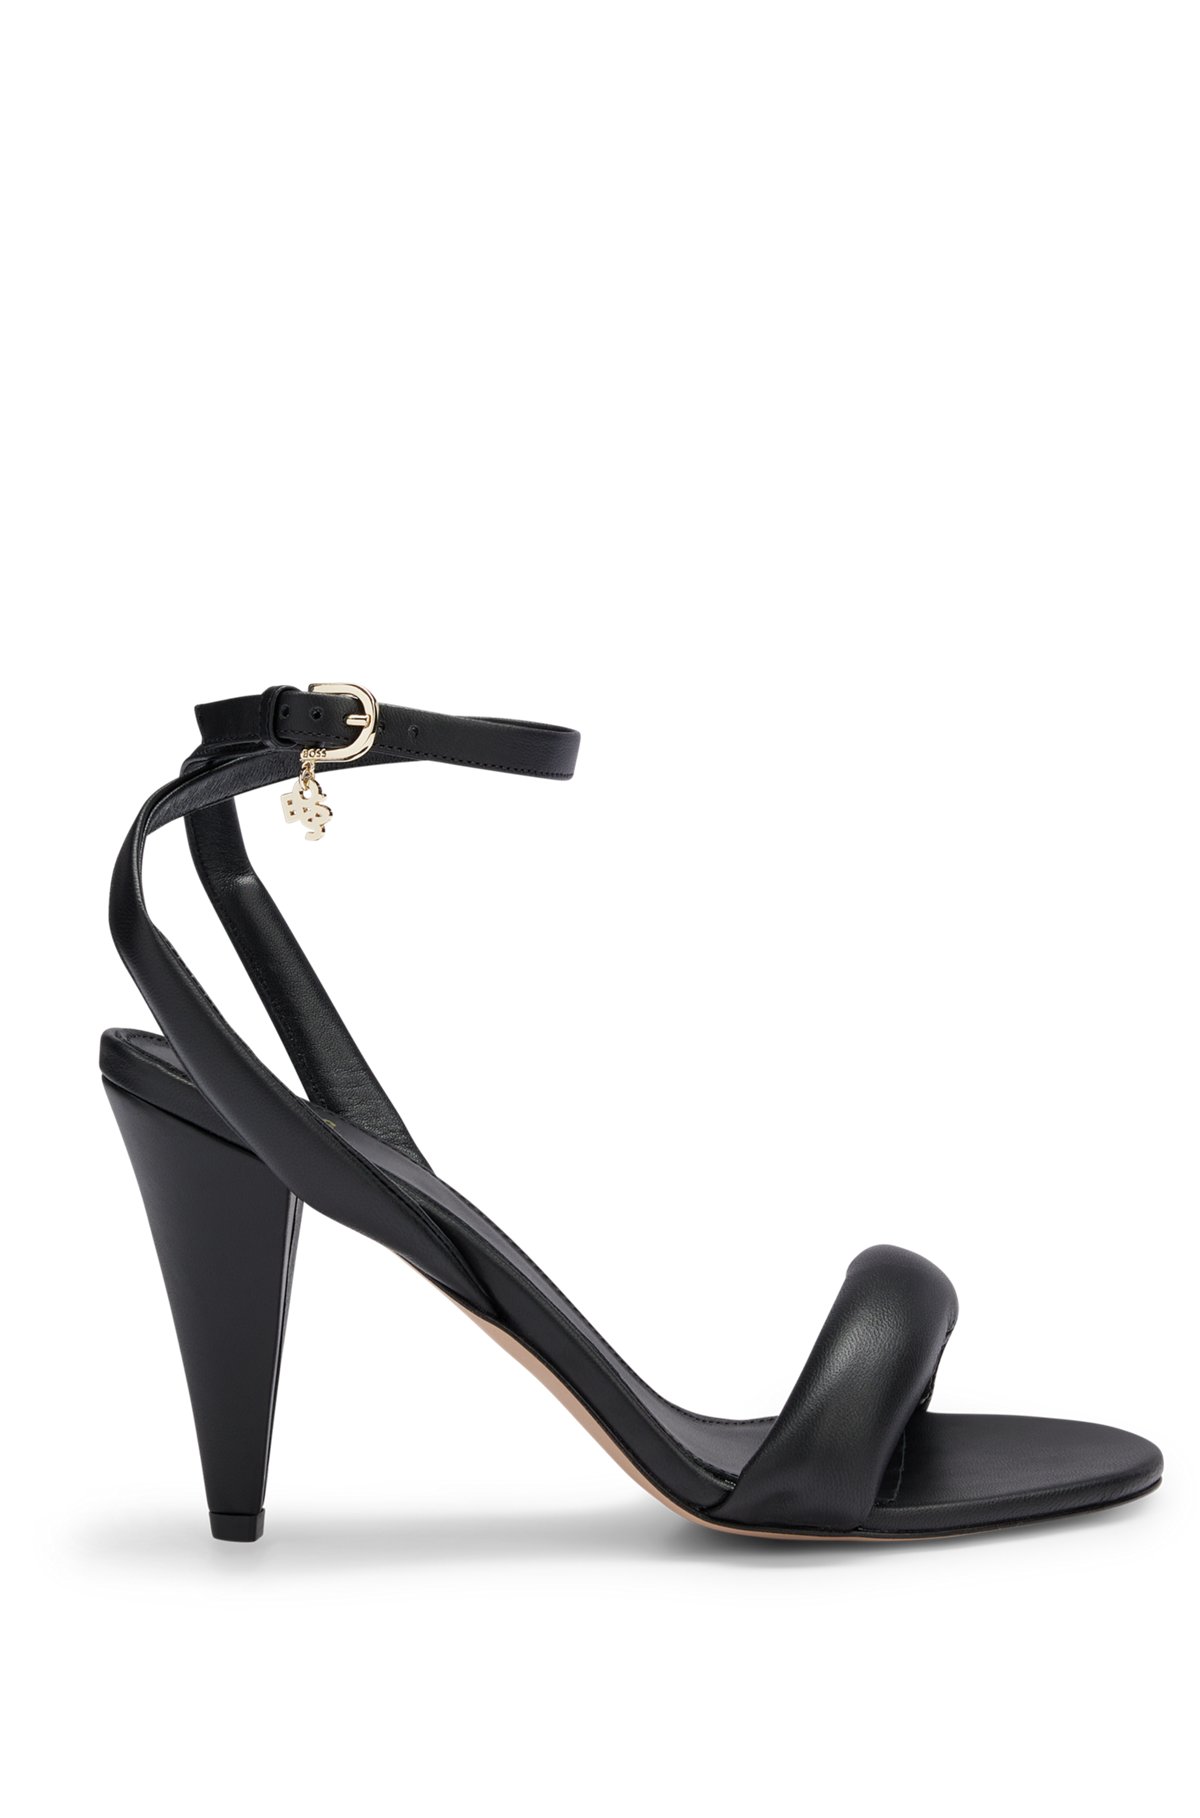 Nappa-leather sandals with logo charm, Black